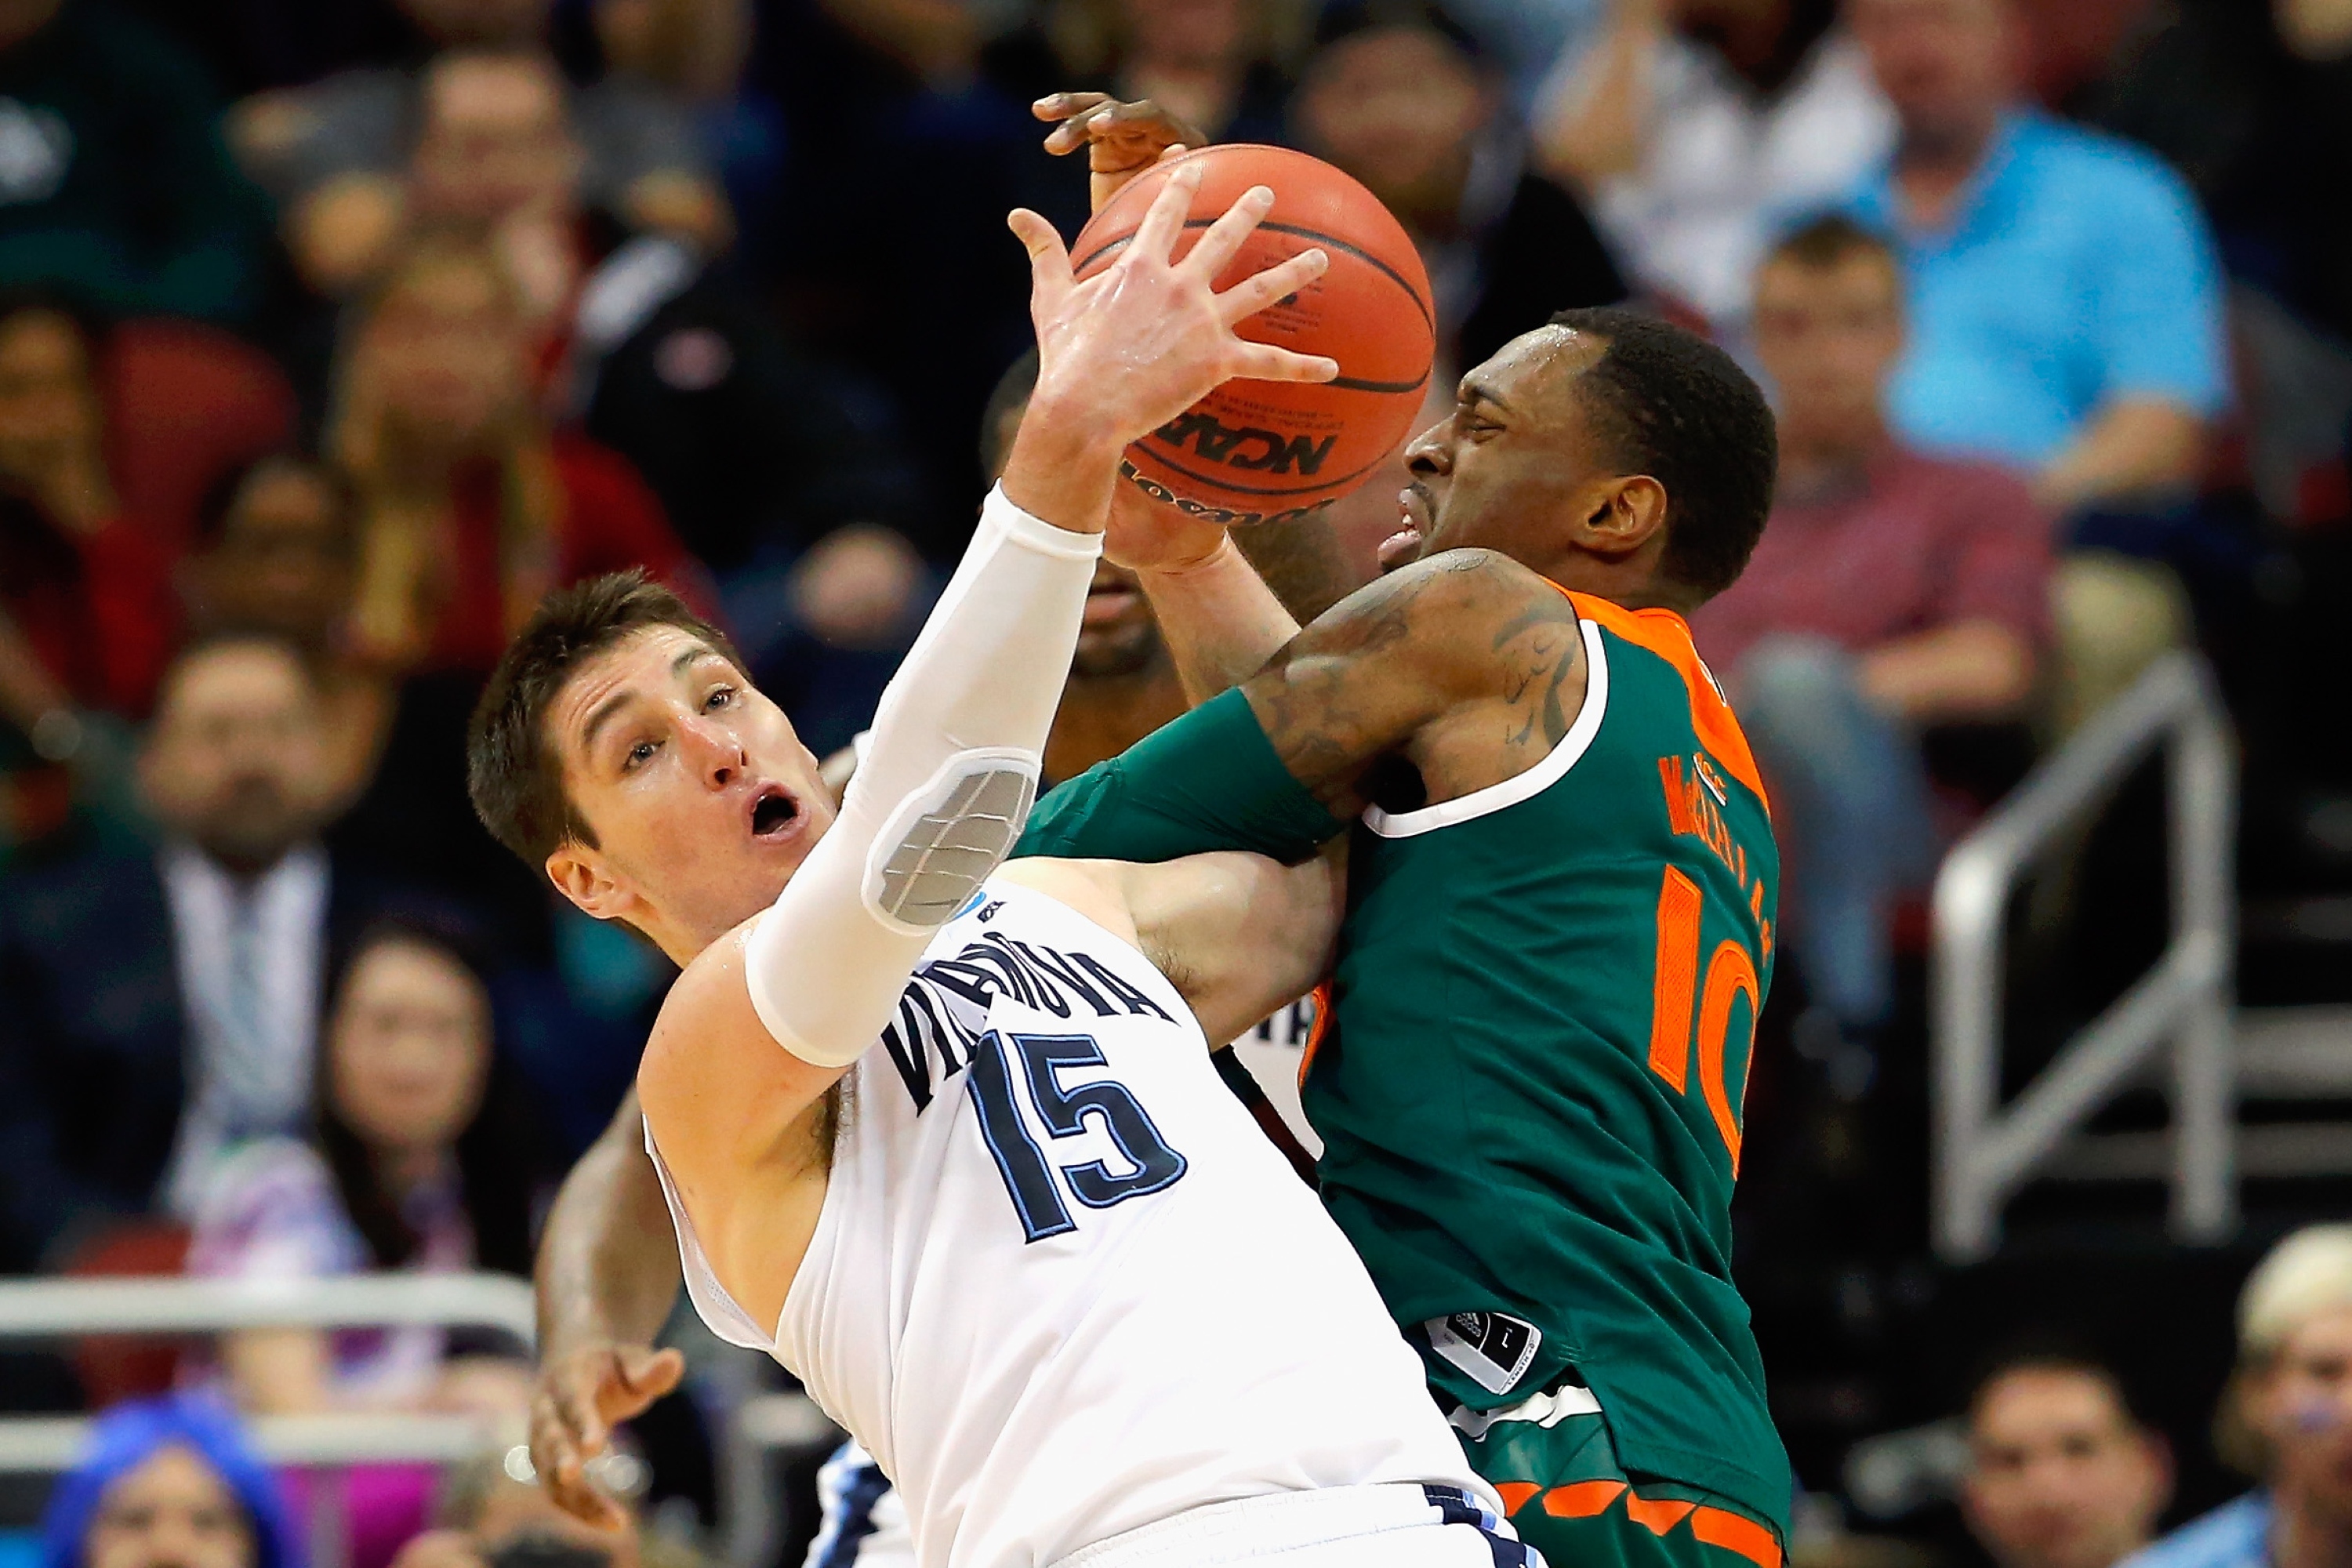 LOUISVILLE, KY - MARCH 24:  Ryan Arcidiacono #15 of the Villanova Wildcats and Sheldon McClellan #10 of the Miami Hurricanes battle for the ball in the first half of their game during the third round of the 2016 NCAA Men's Basketball Tournament at KFC YUM! Center on March 24, 2016 in Louisville, Kentucky.  (Photo by Kevin C. Cox/Getty Images)